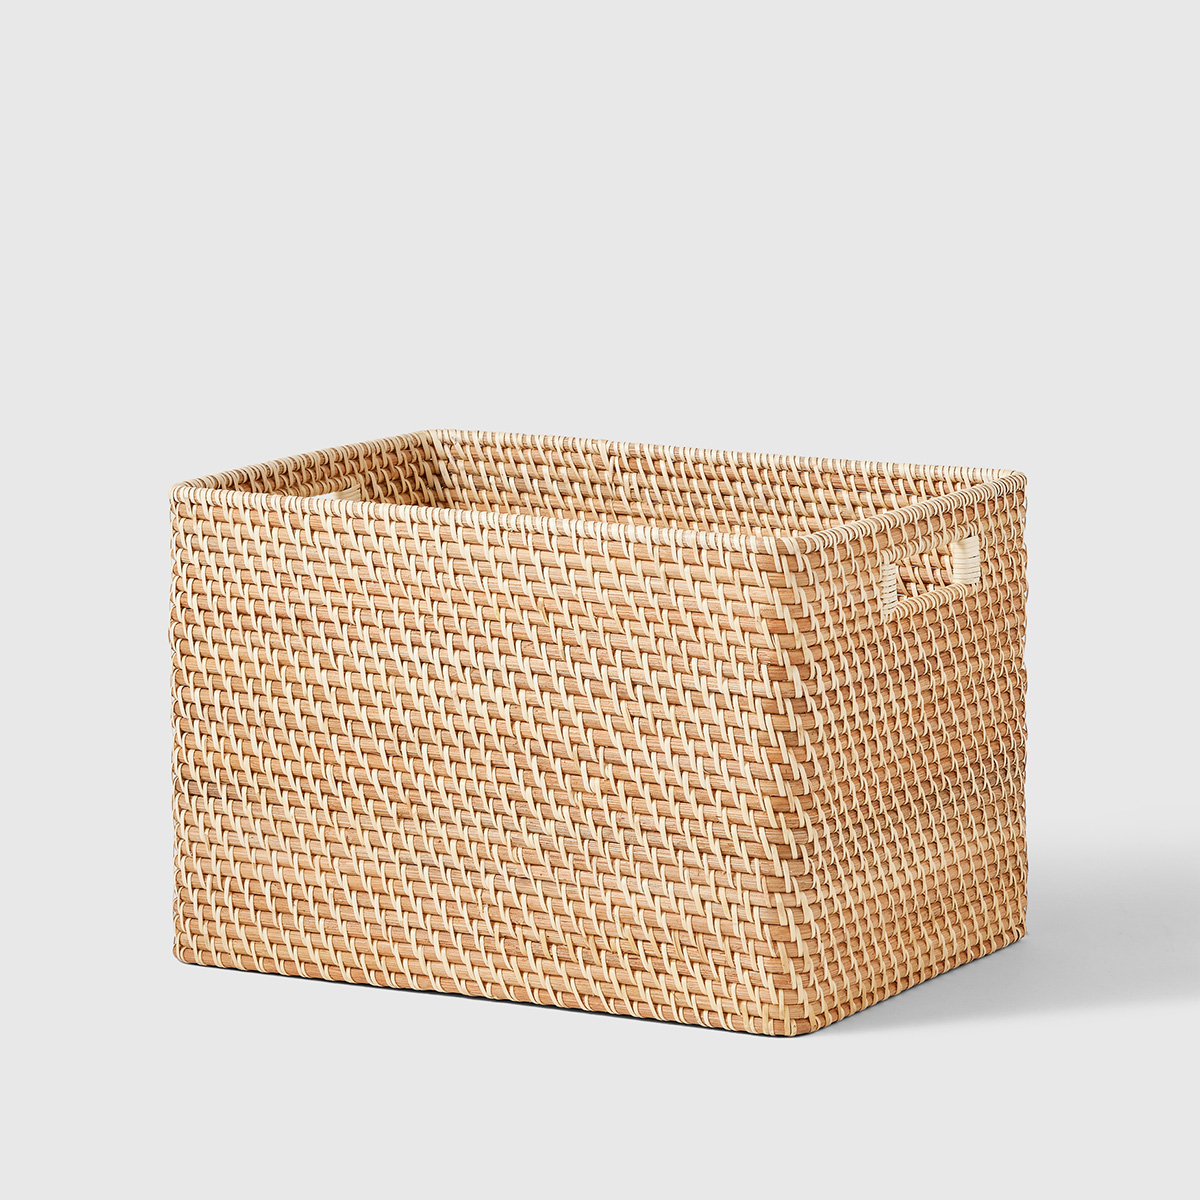 https://www.containerstore.com/catalogimages/441449/10086635_Kon_Mari_Ori_X-large_curved.jpg